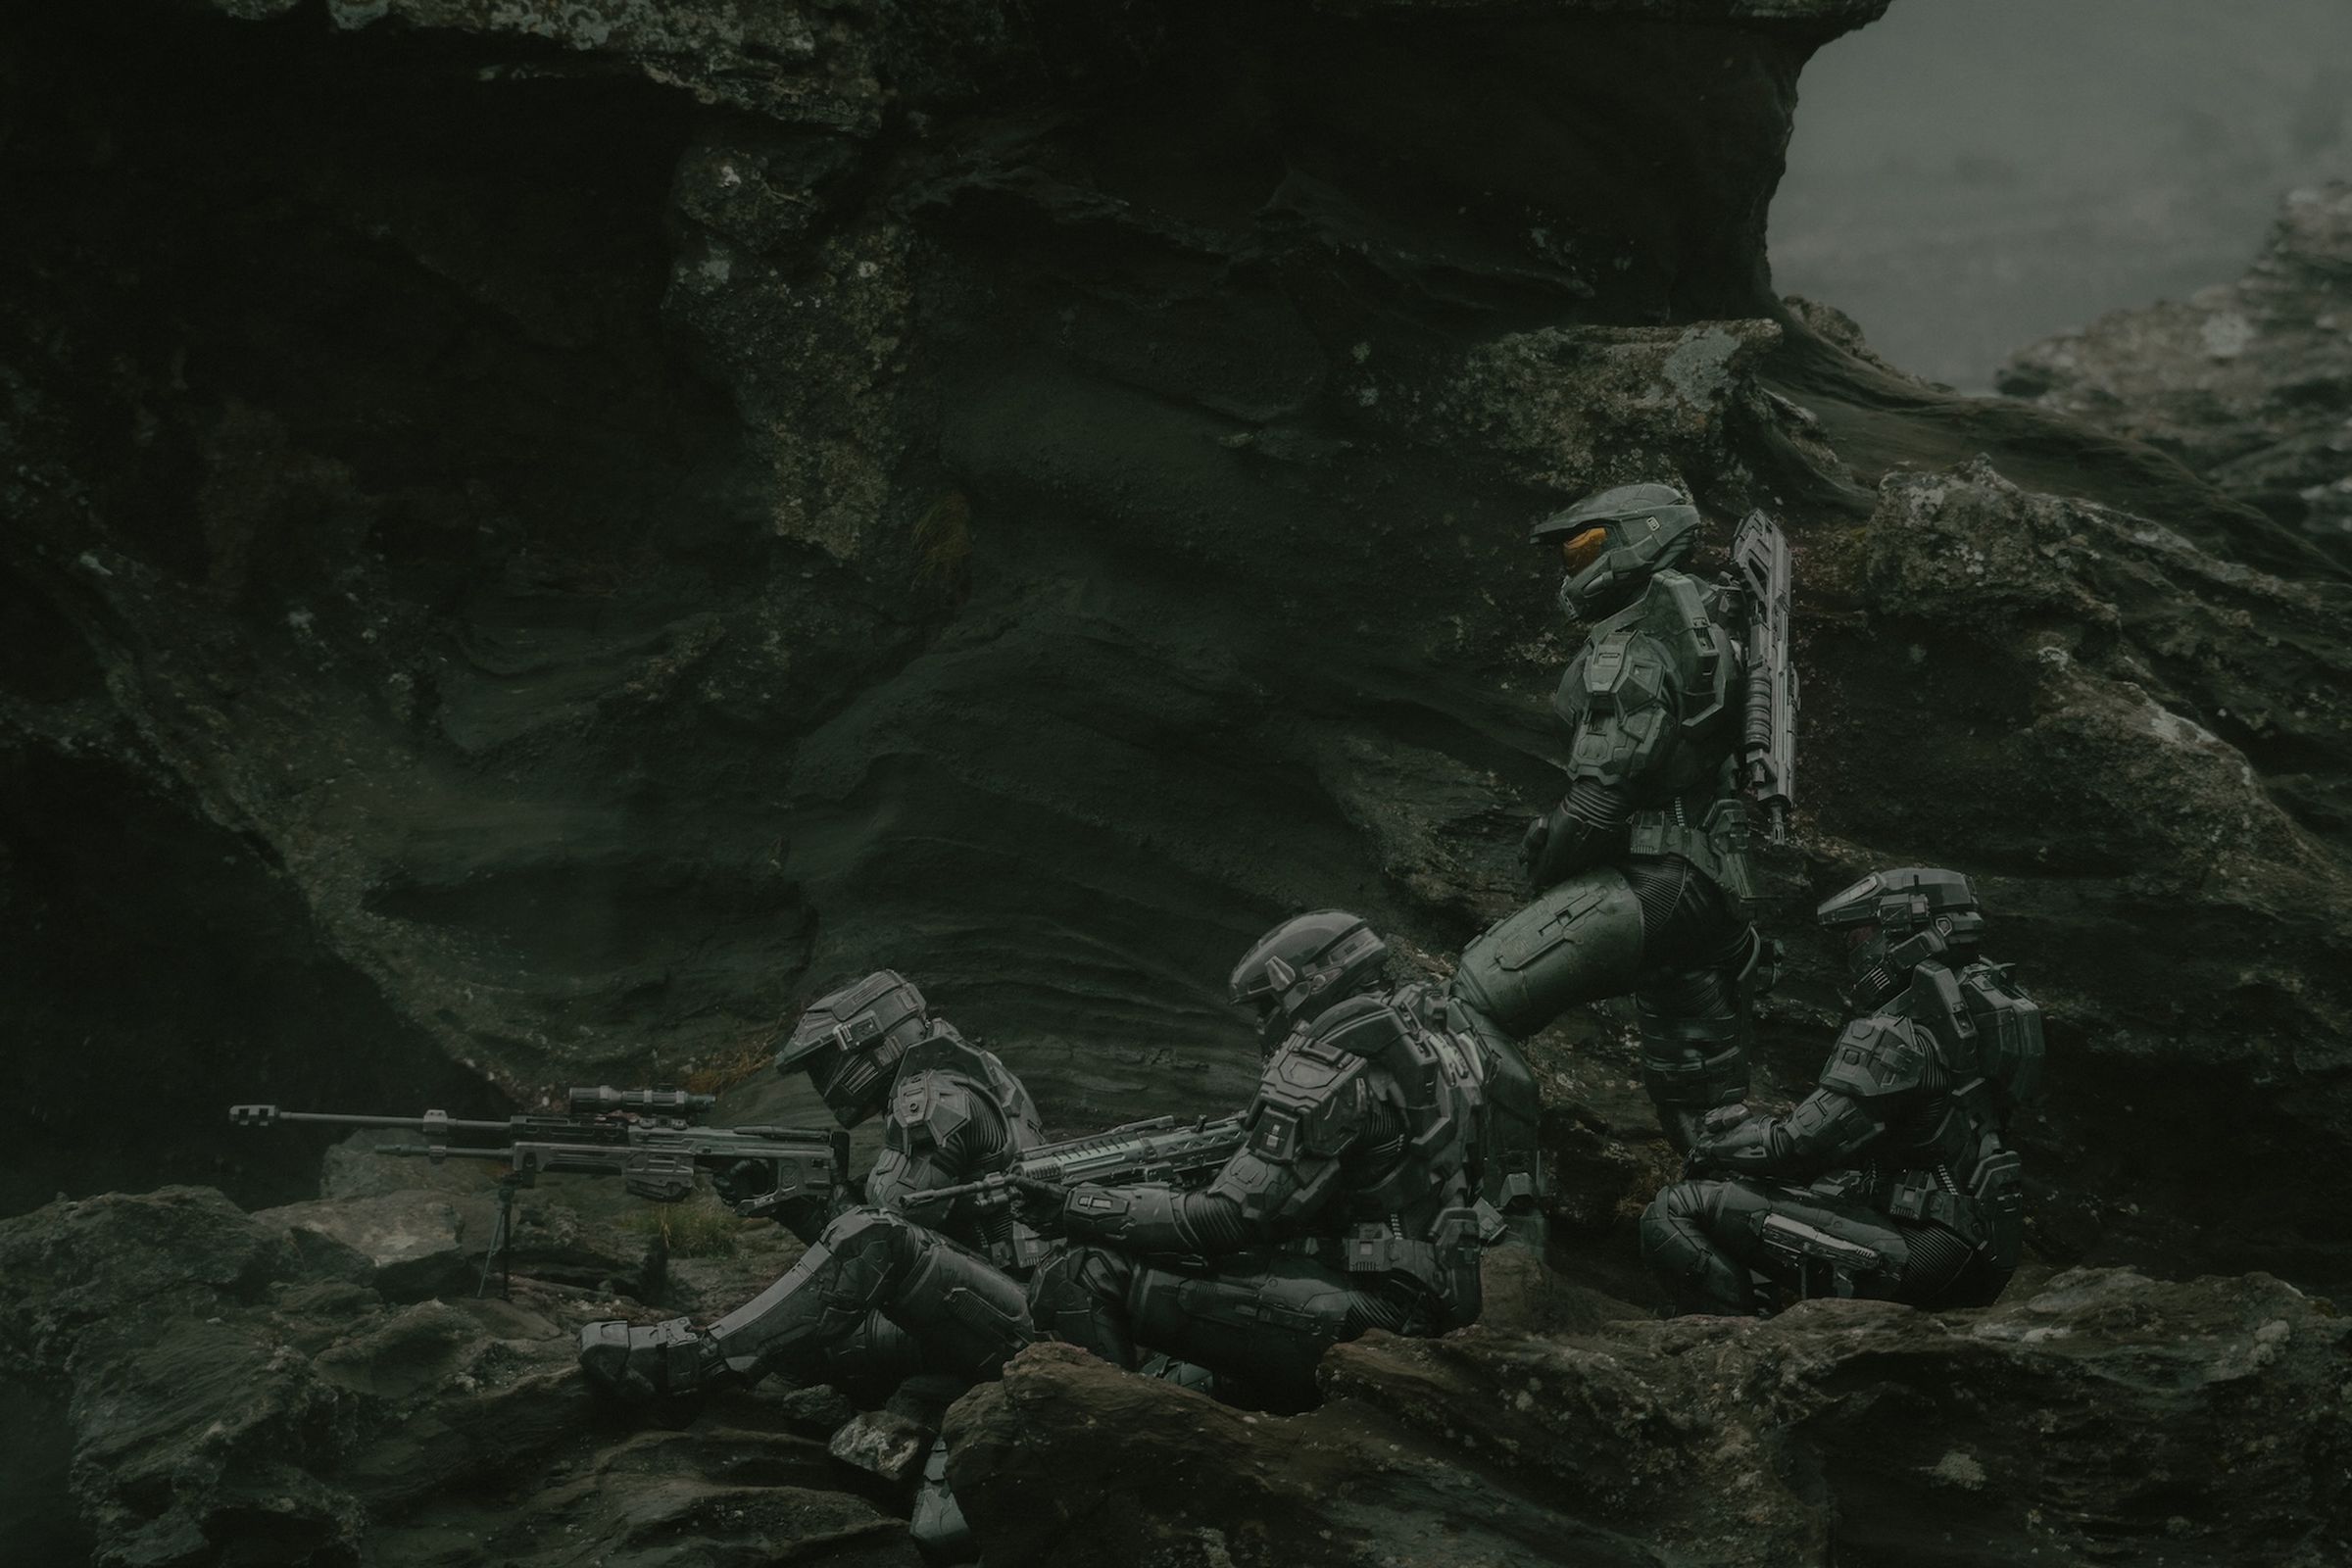 Screenshot from Halo season 2 episode 1 “Sanctuary” featuring a quartet of Spartans in power armor.